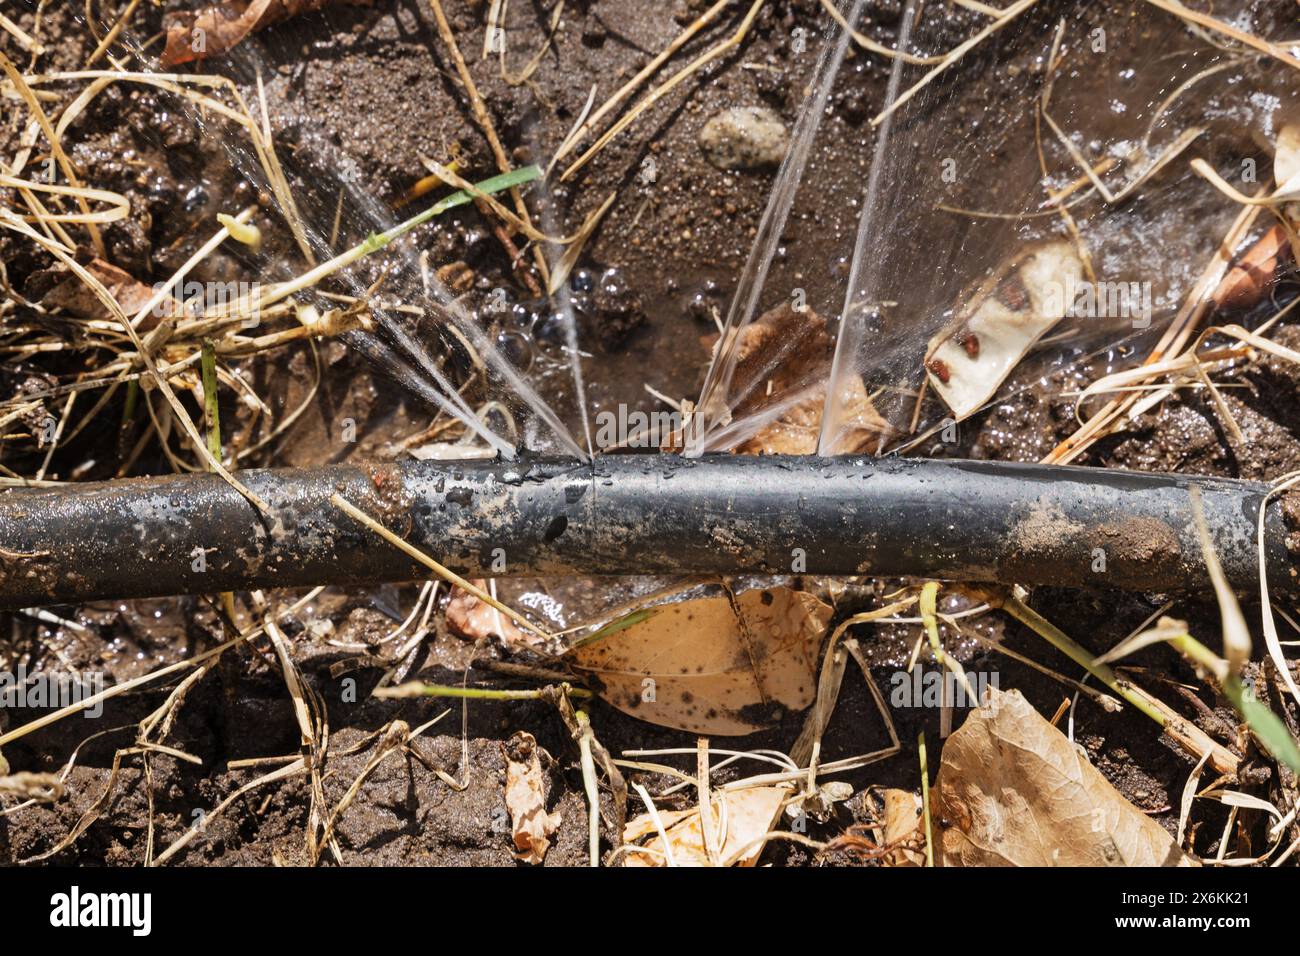 black plastic irrigation hose leaking water from gopher chewed holes Stock Photo